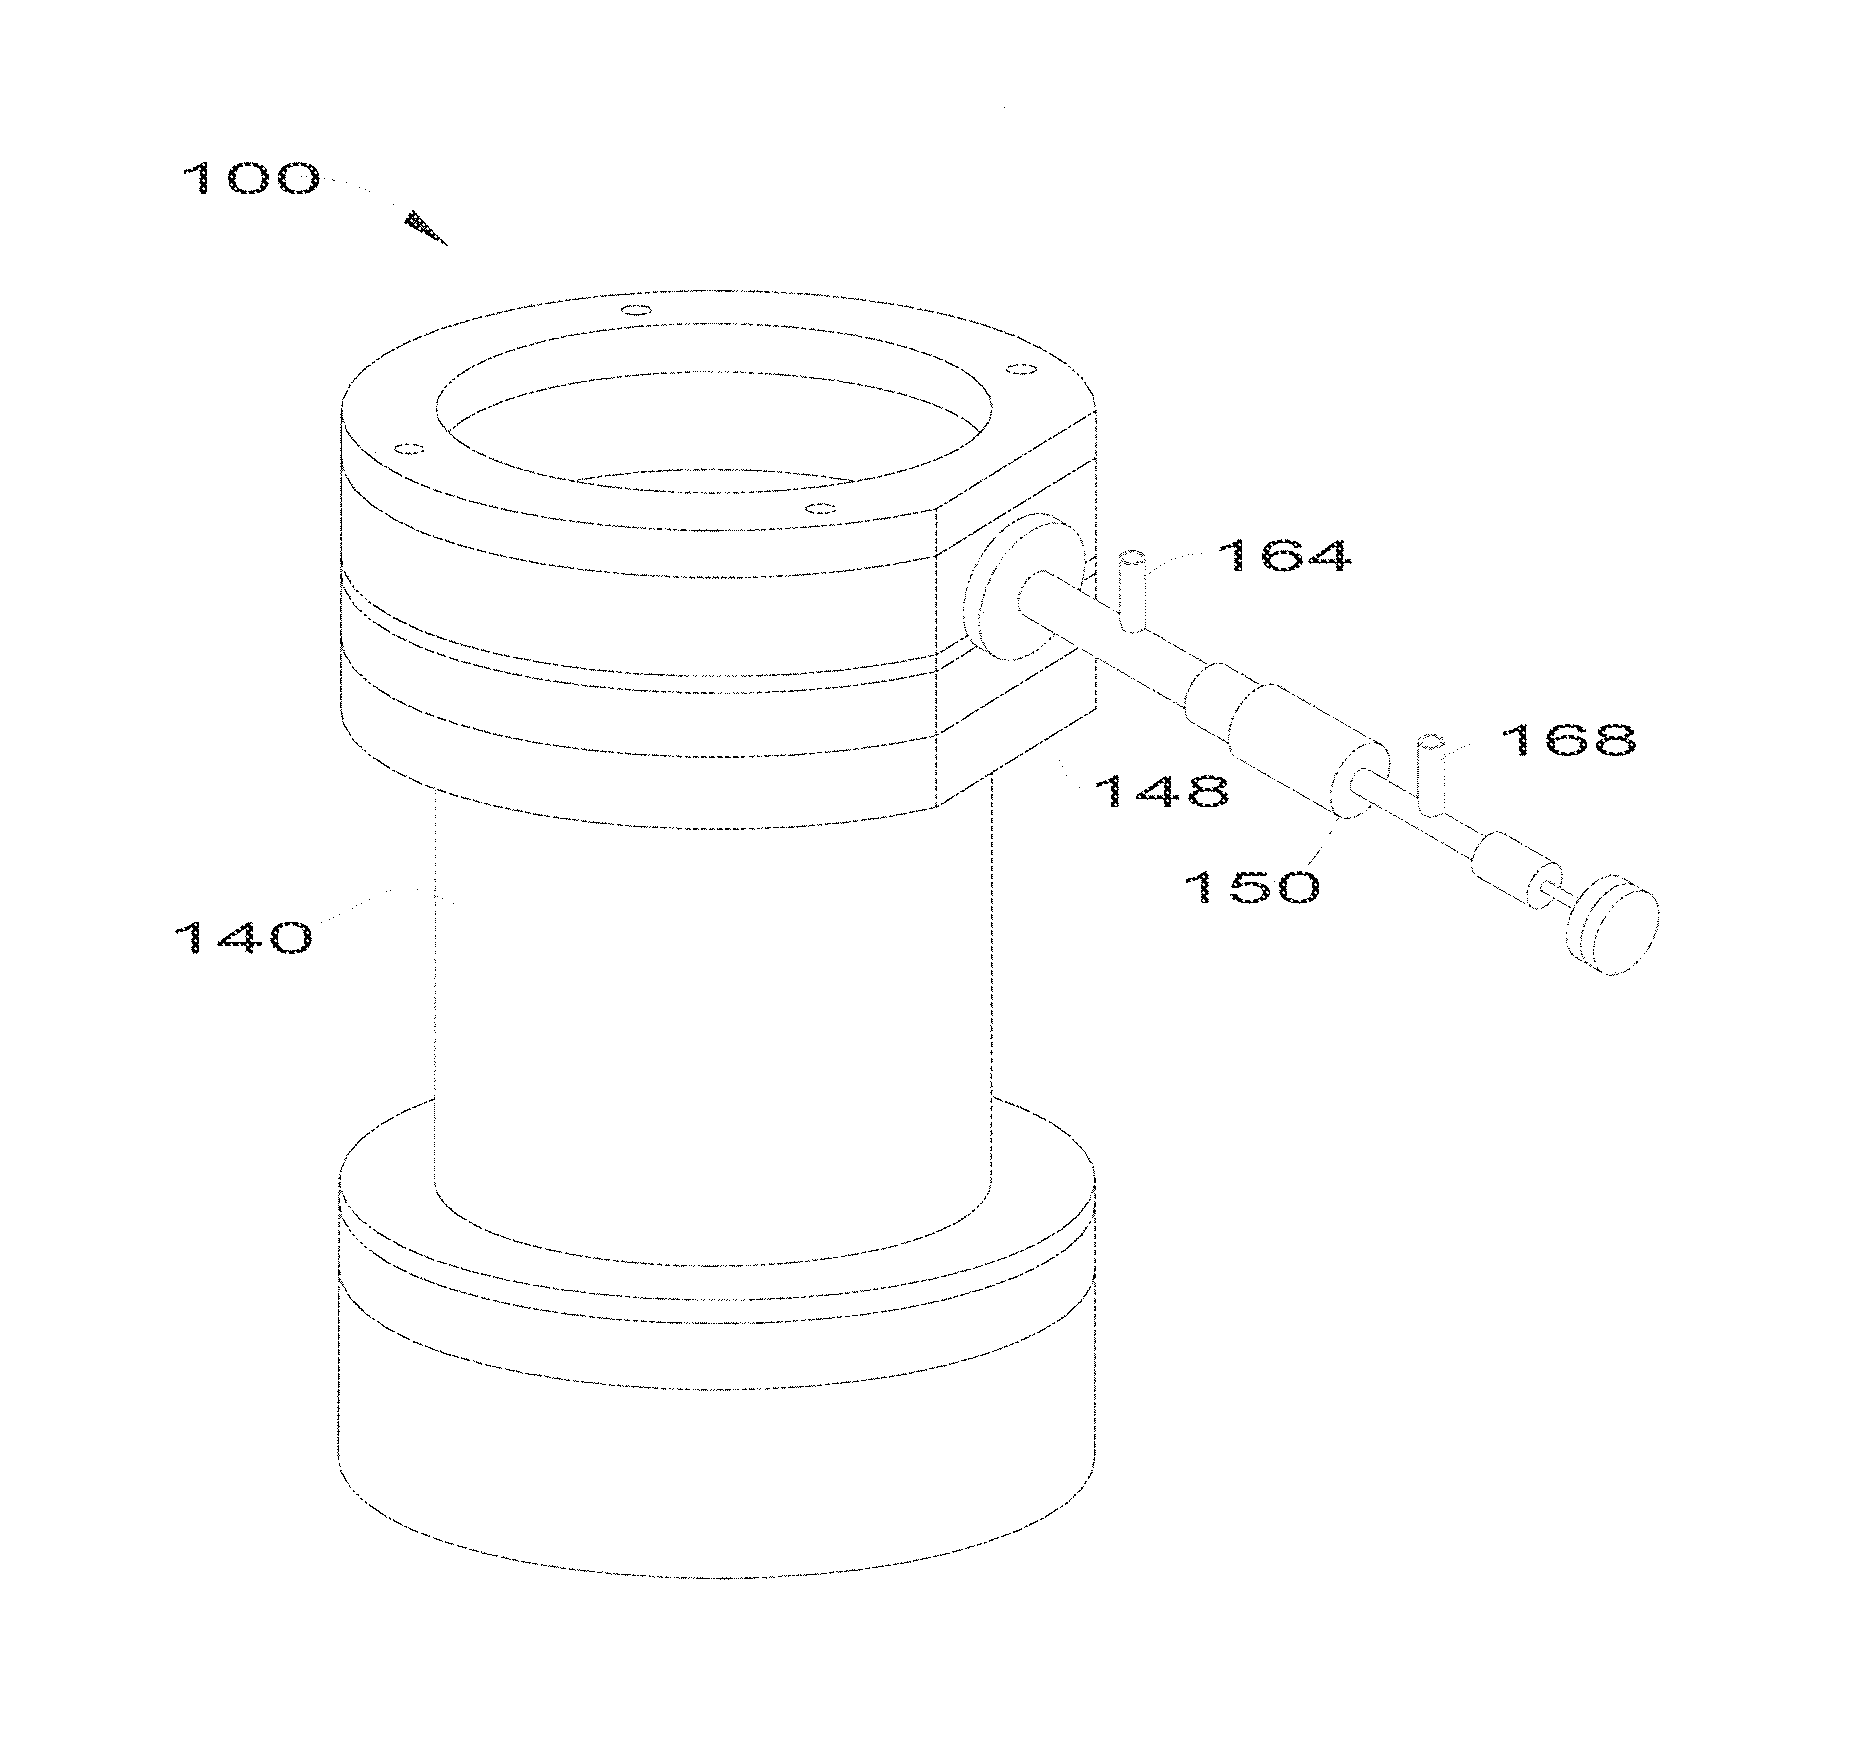 Apparatus and process for contacting and separating liquids